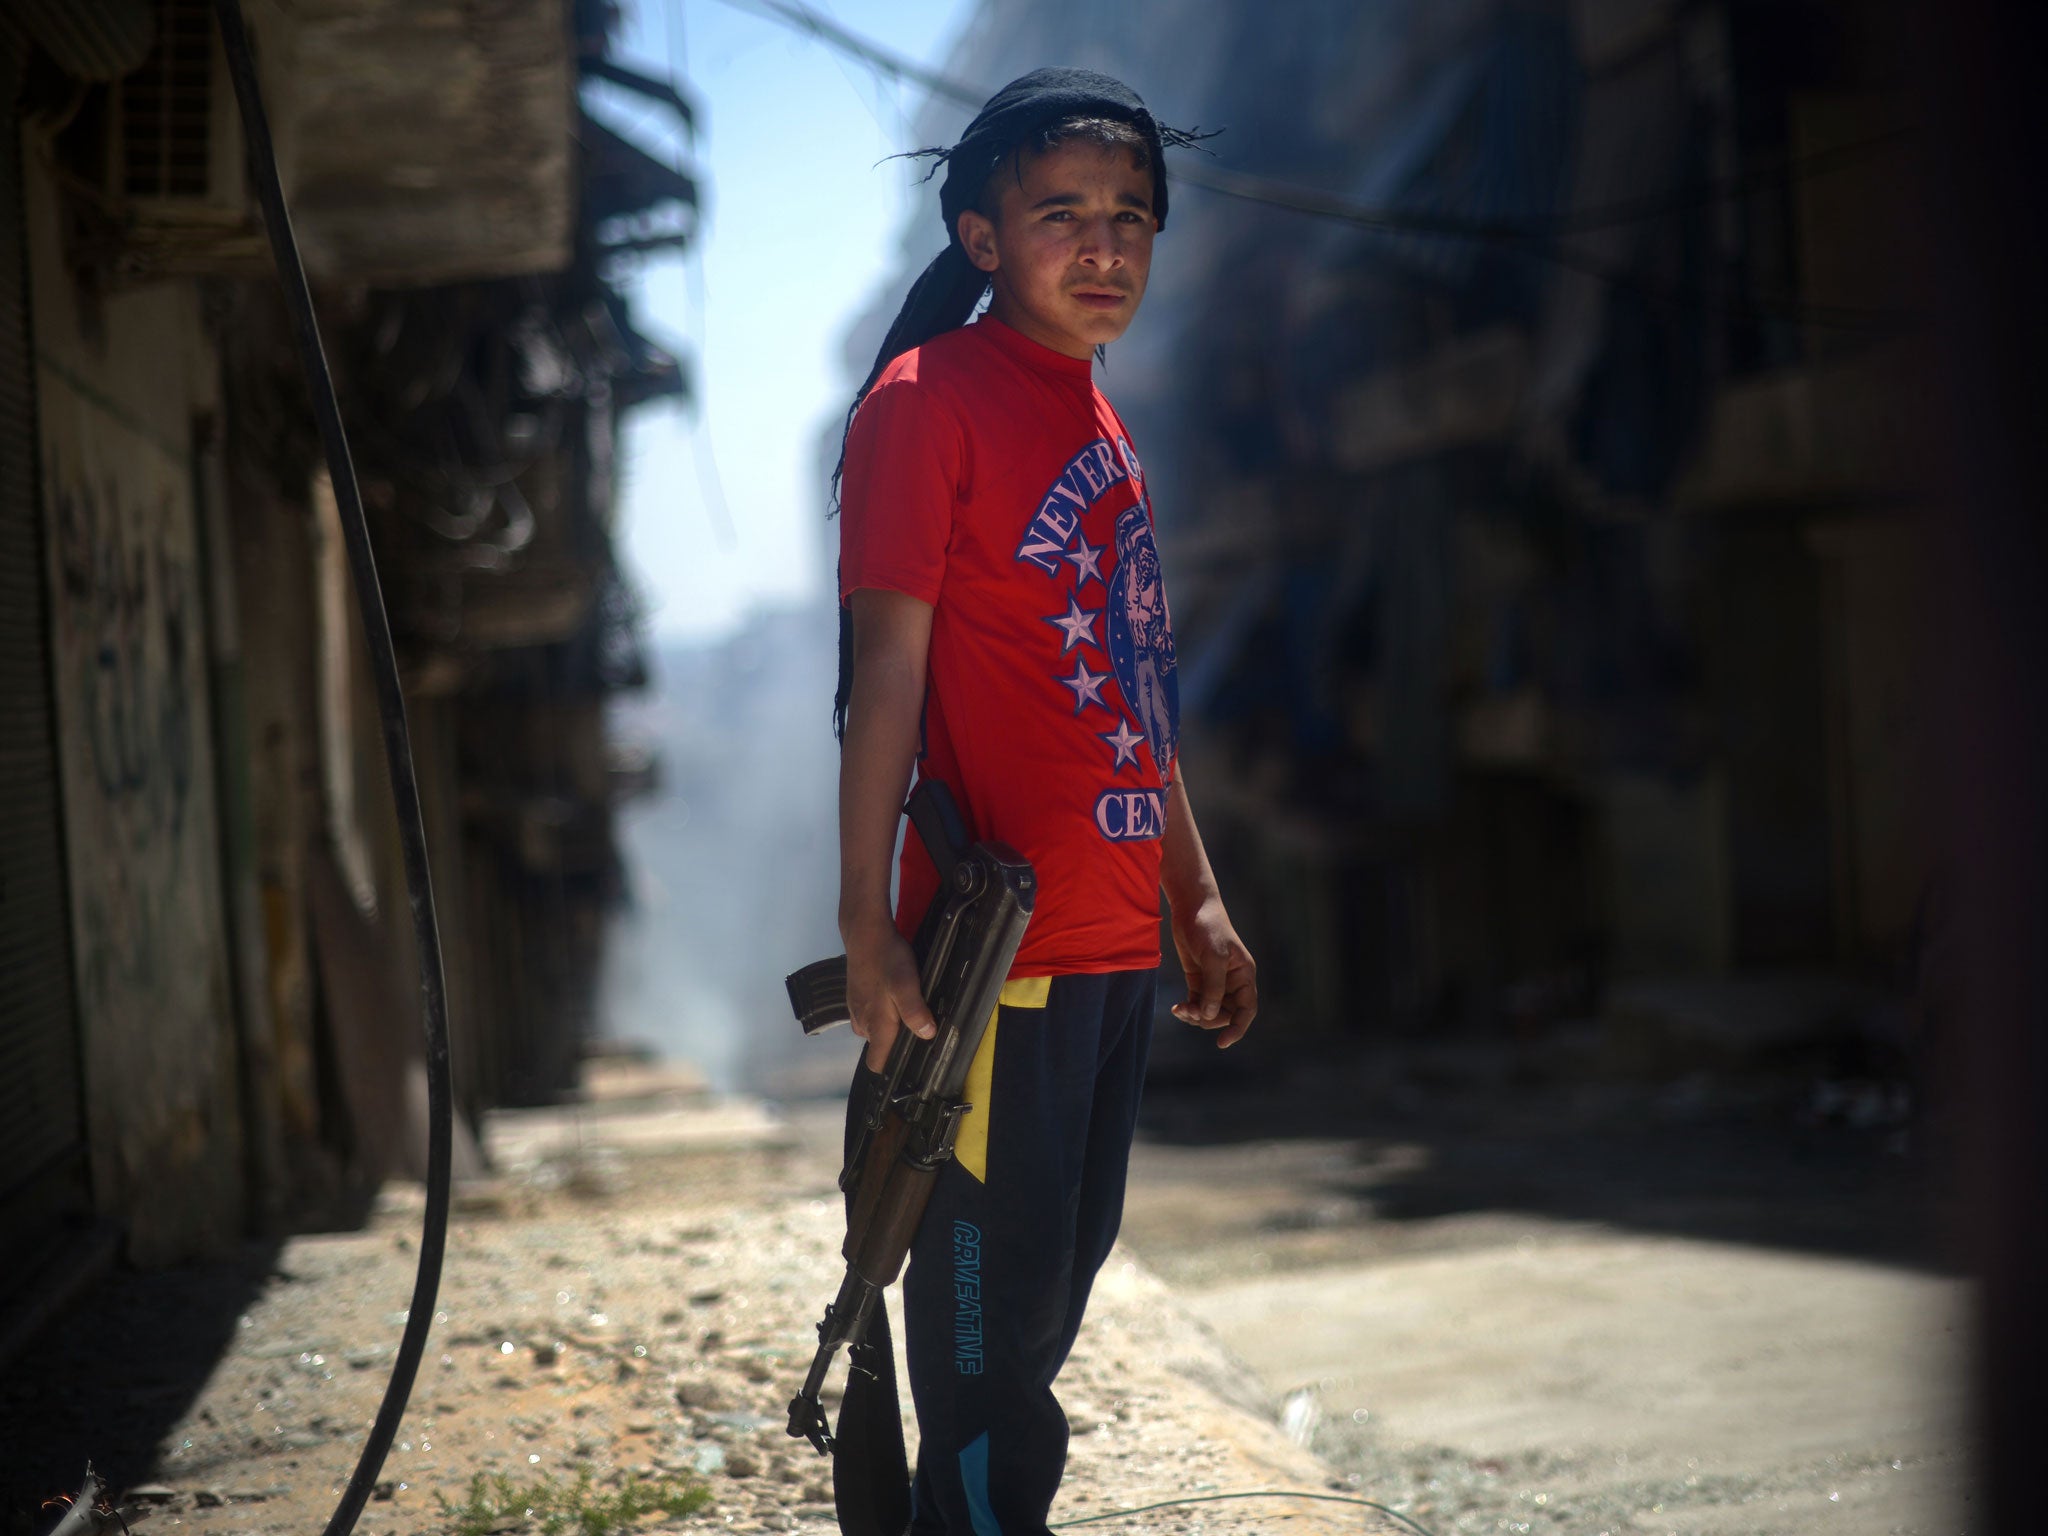 Boy soldier with an AK-47 on the streets of Aleppo, Syria